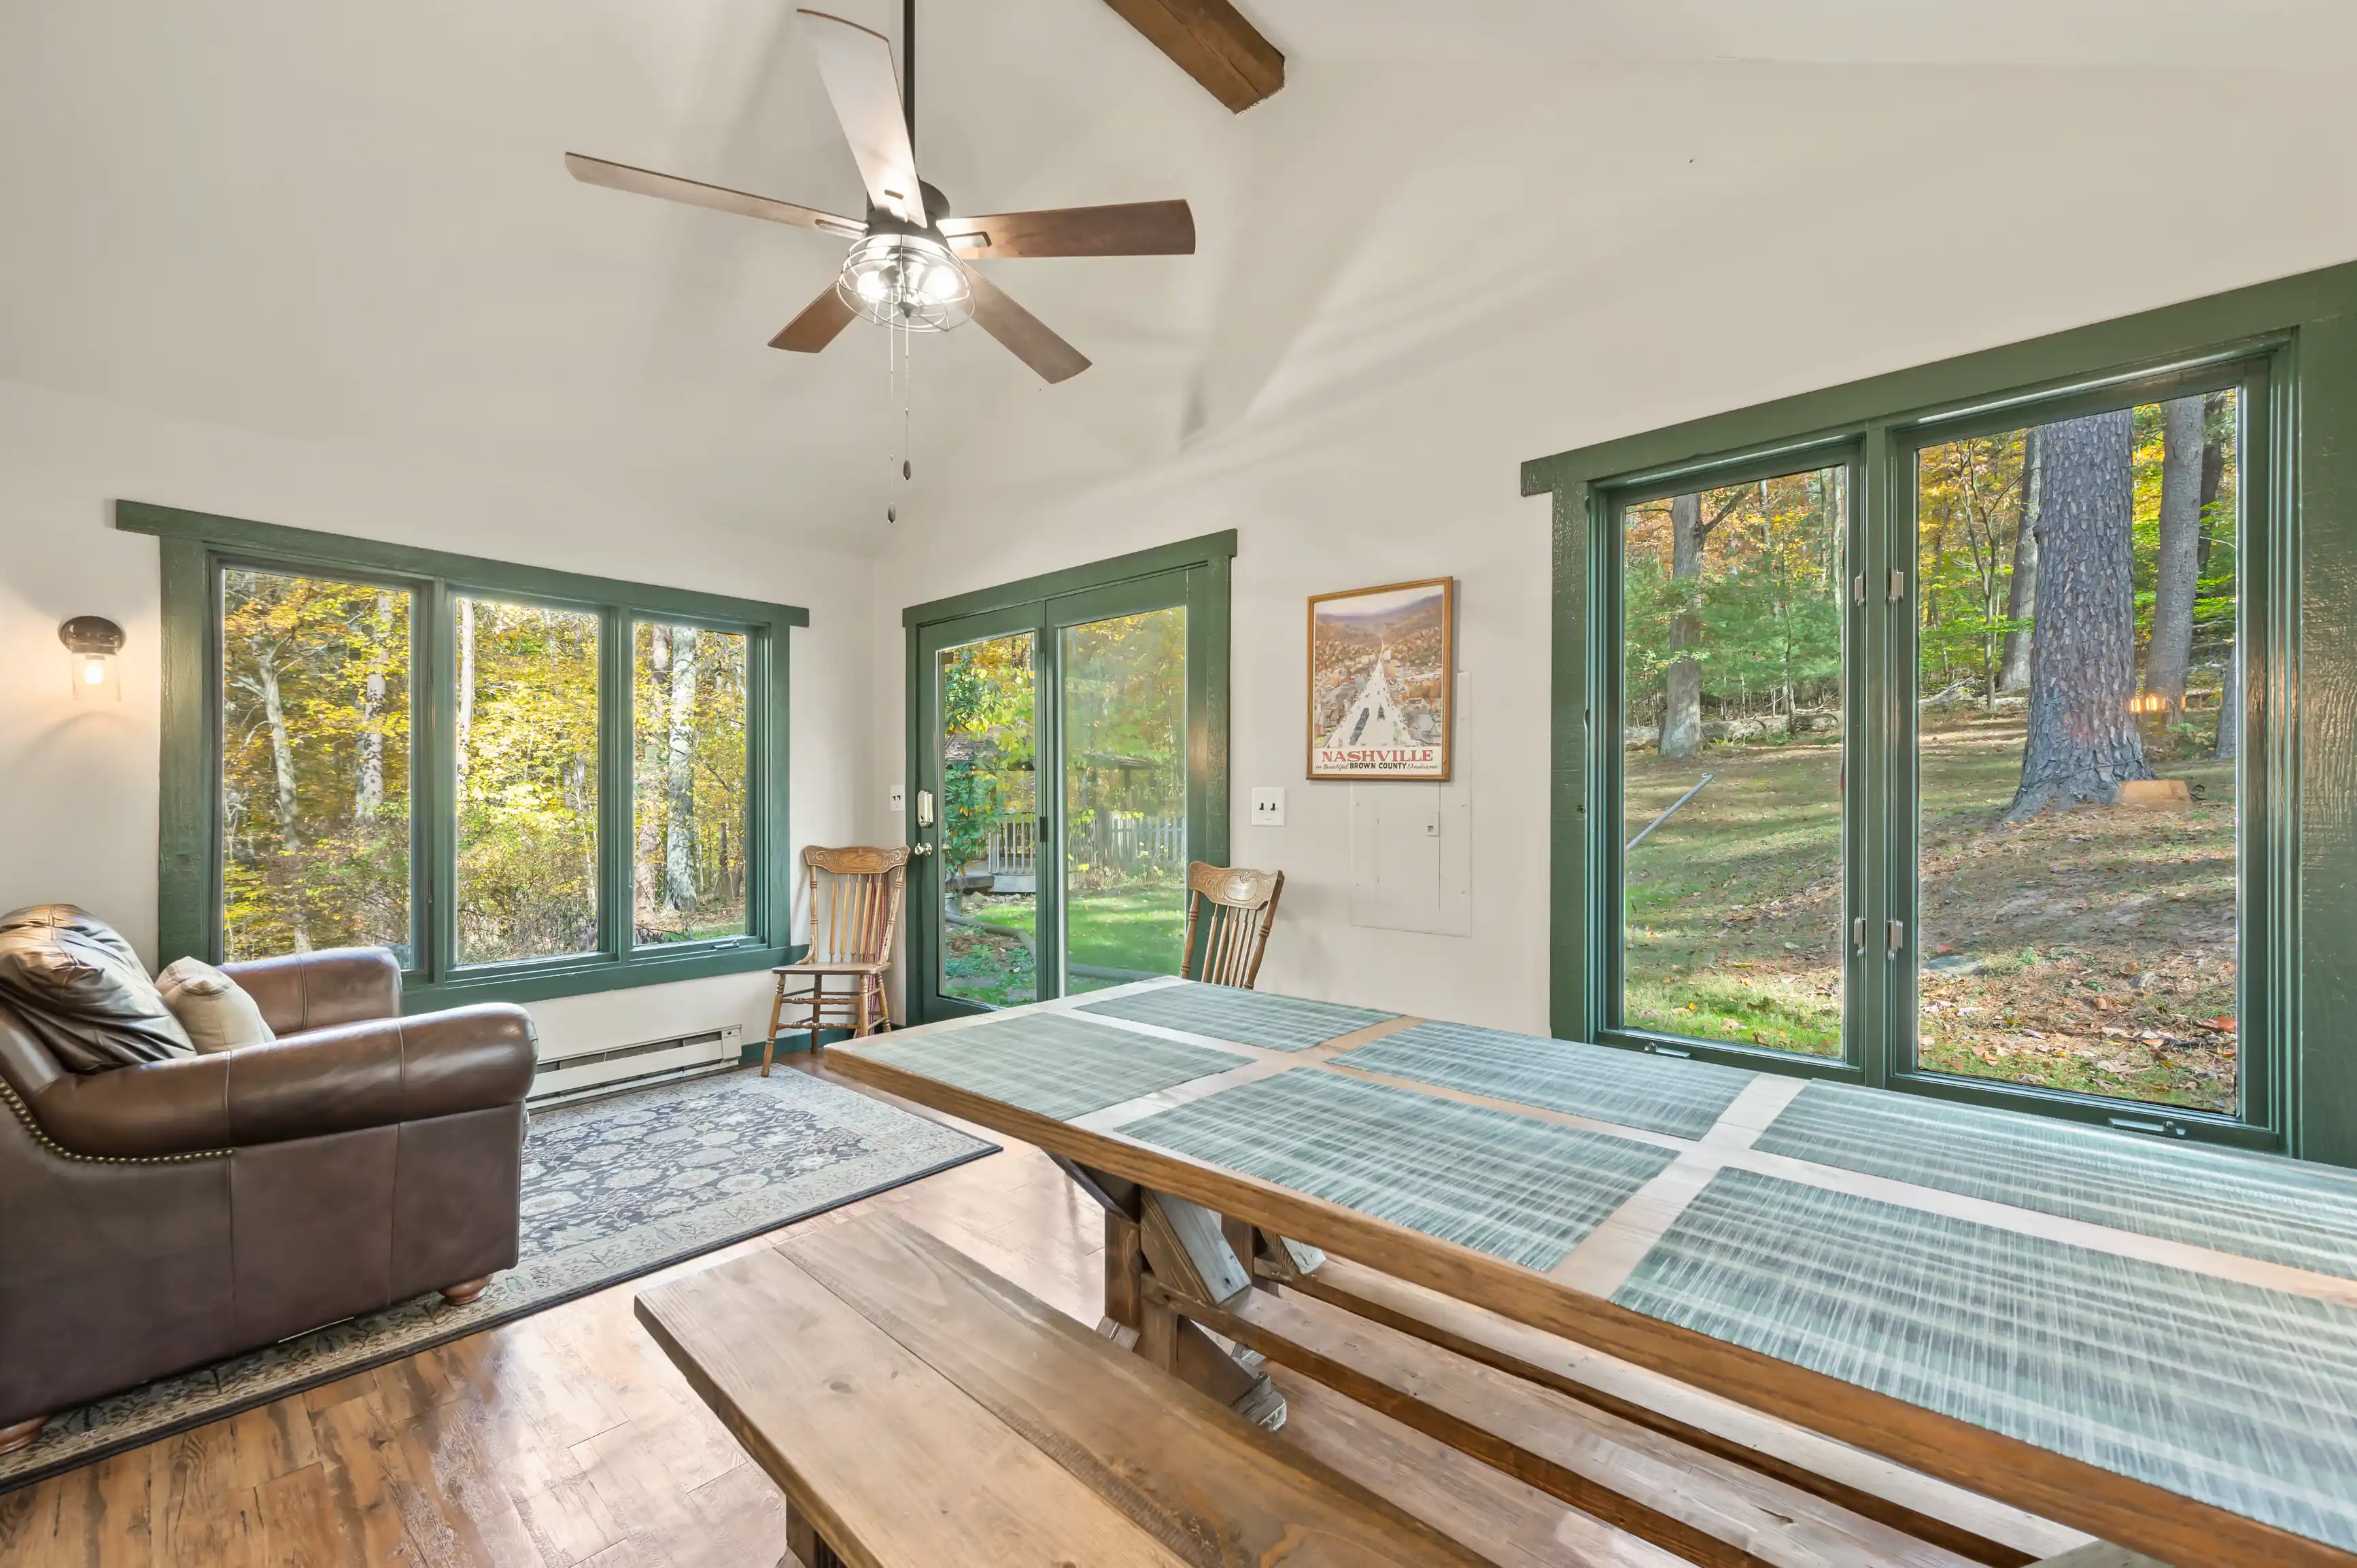 Bright and airy sunroom with large windows overlooking trees, furnished with a ping-pong table, a brown leather sofa, and a ceiling fan above.